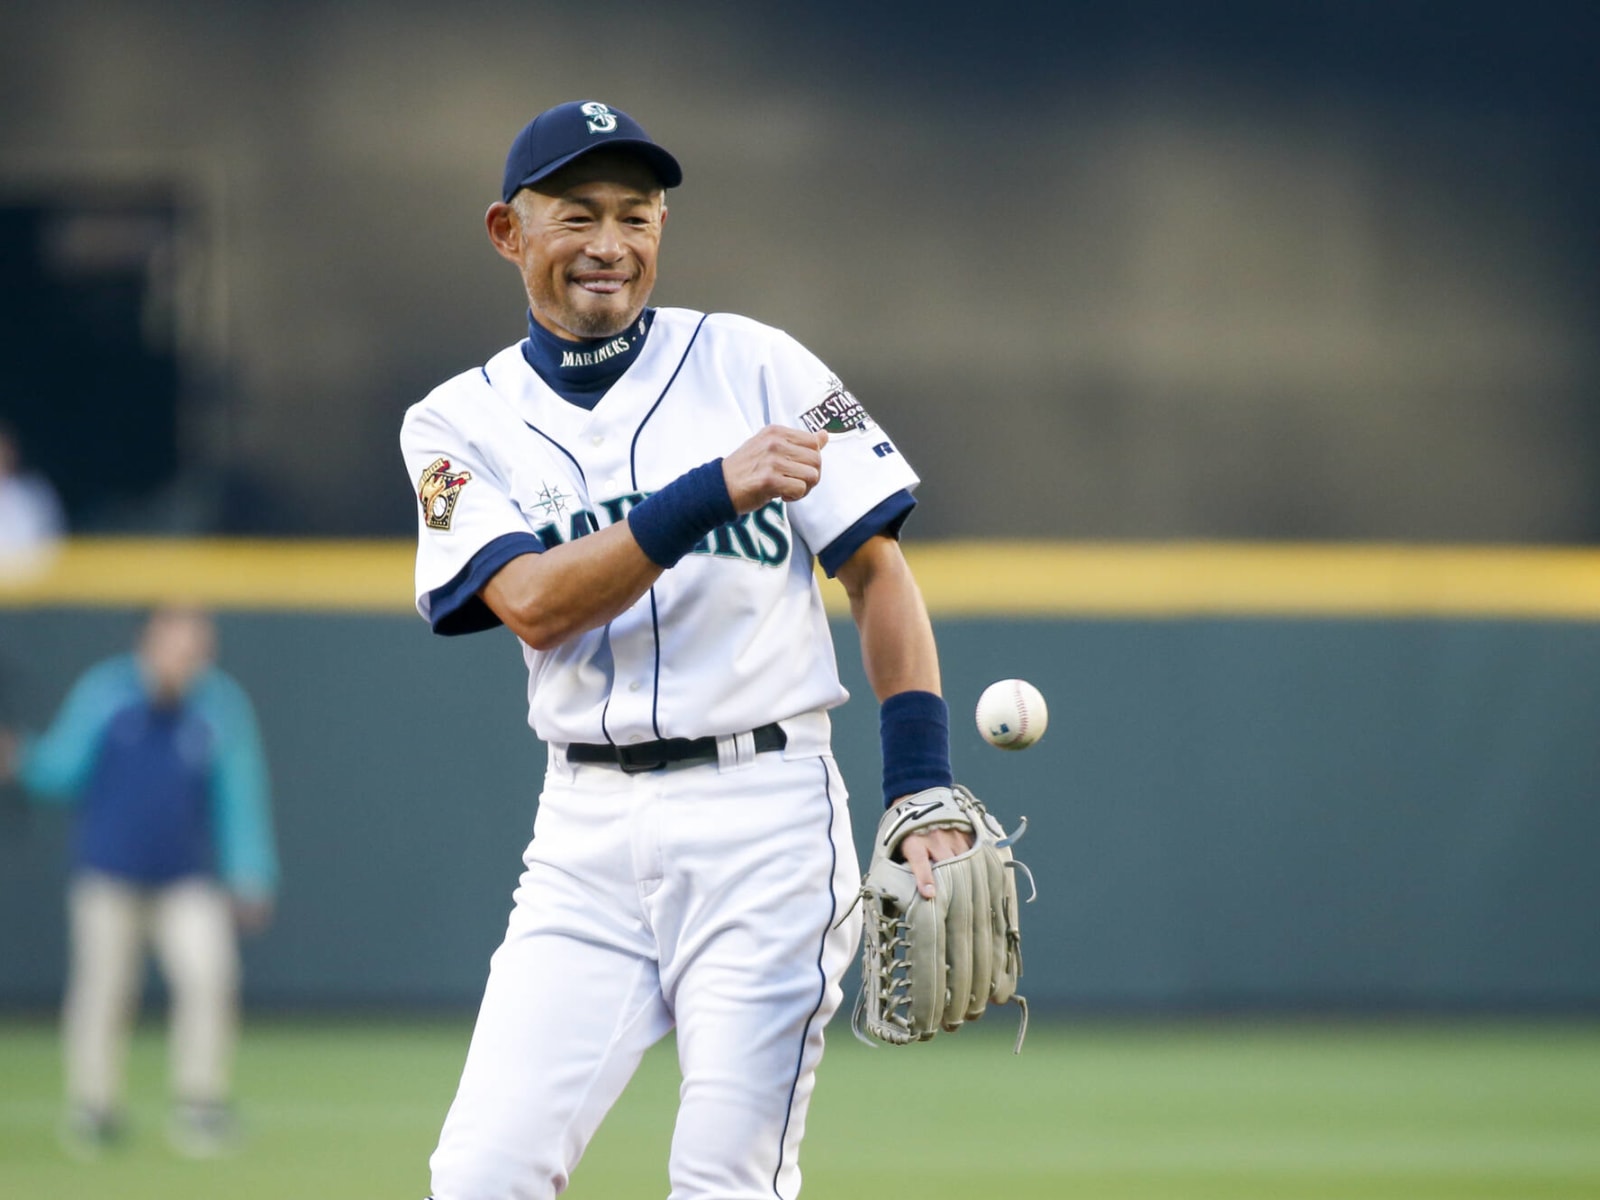 Former Seattle Mariners outfielder Ichiro is a pitcher now